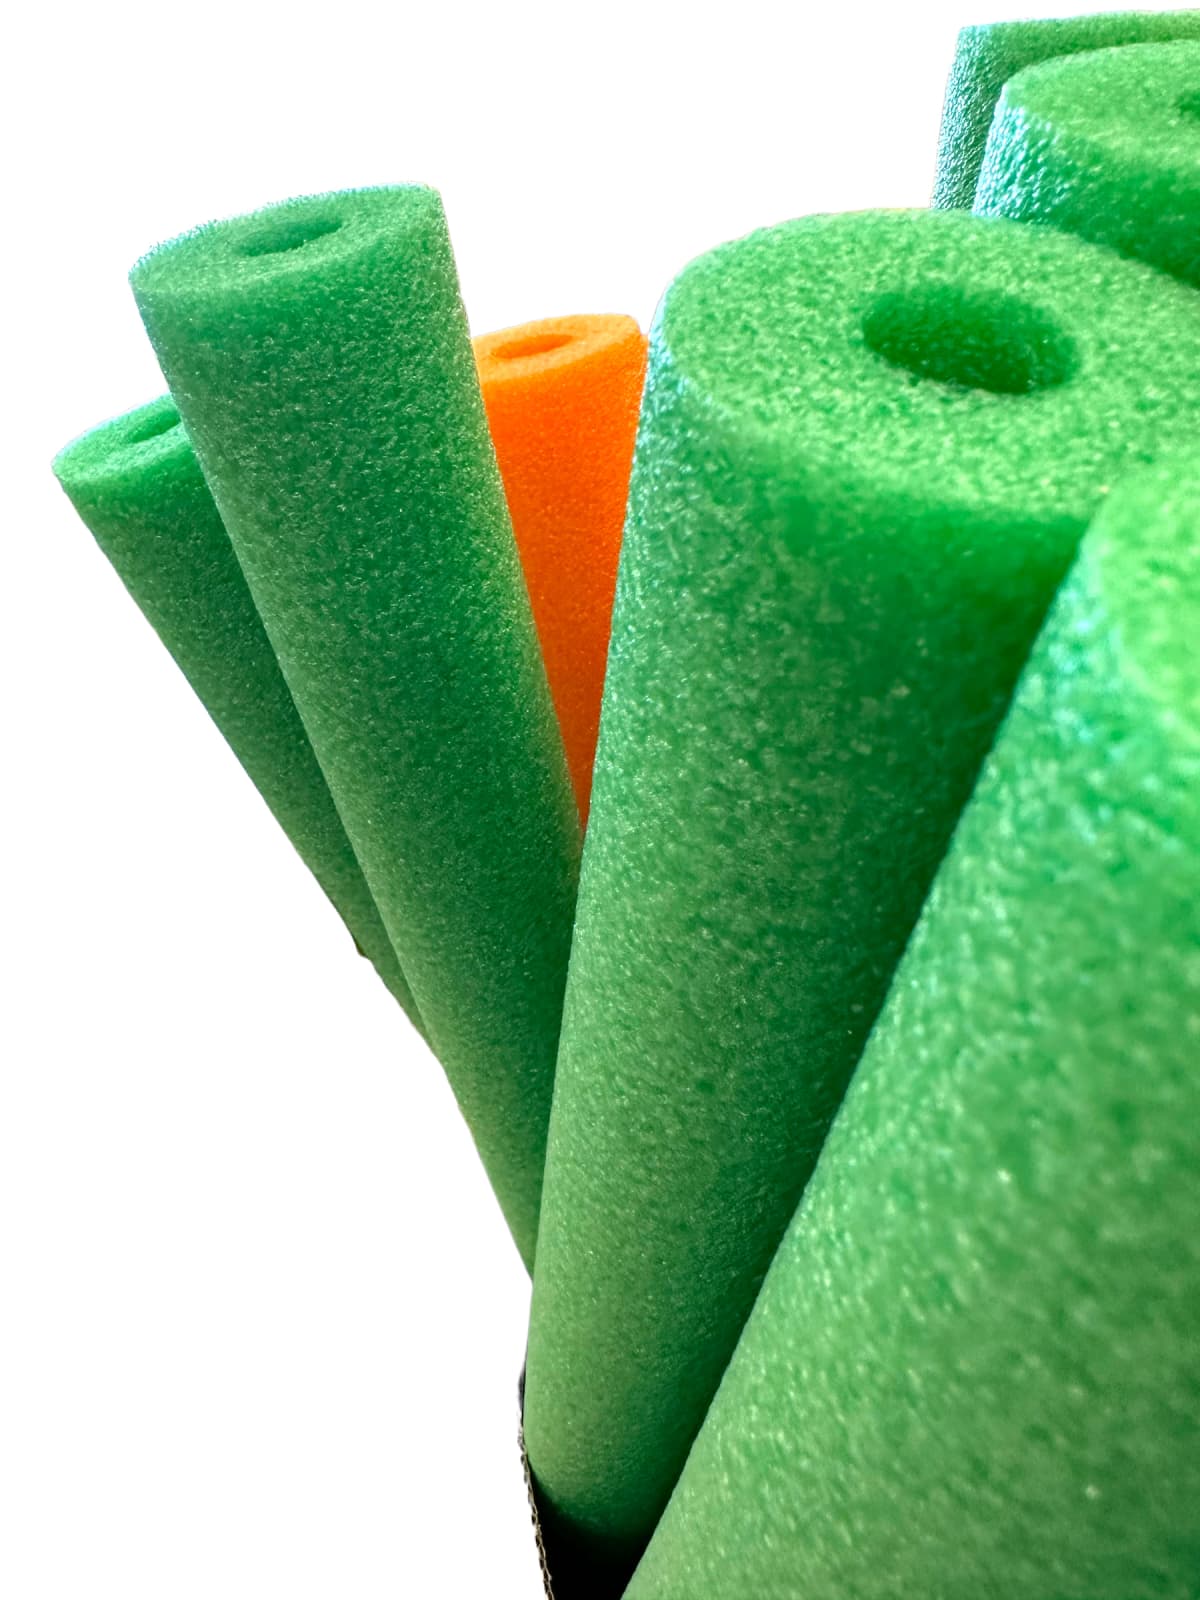 Pool noodles on a white background